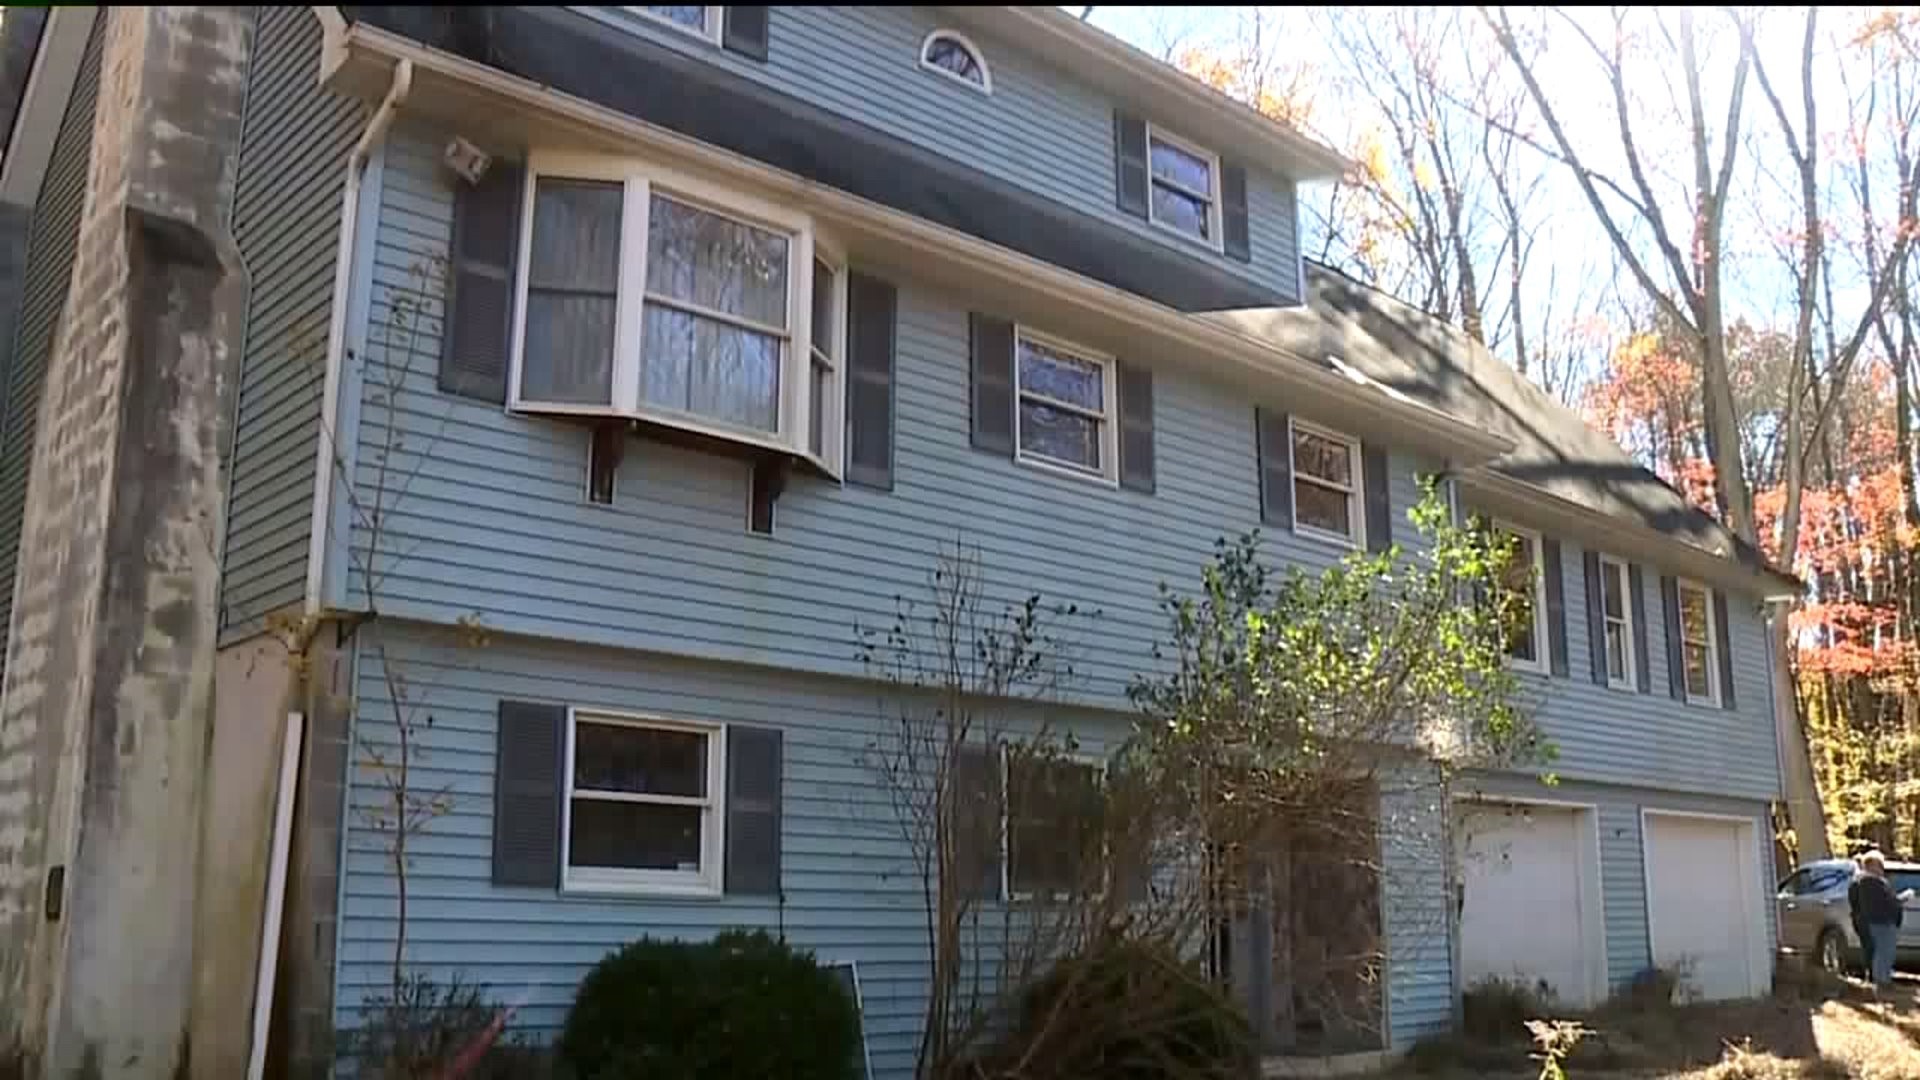 Former Drug House in Monroe County Sold at Auction